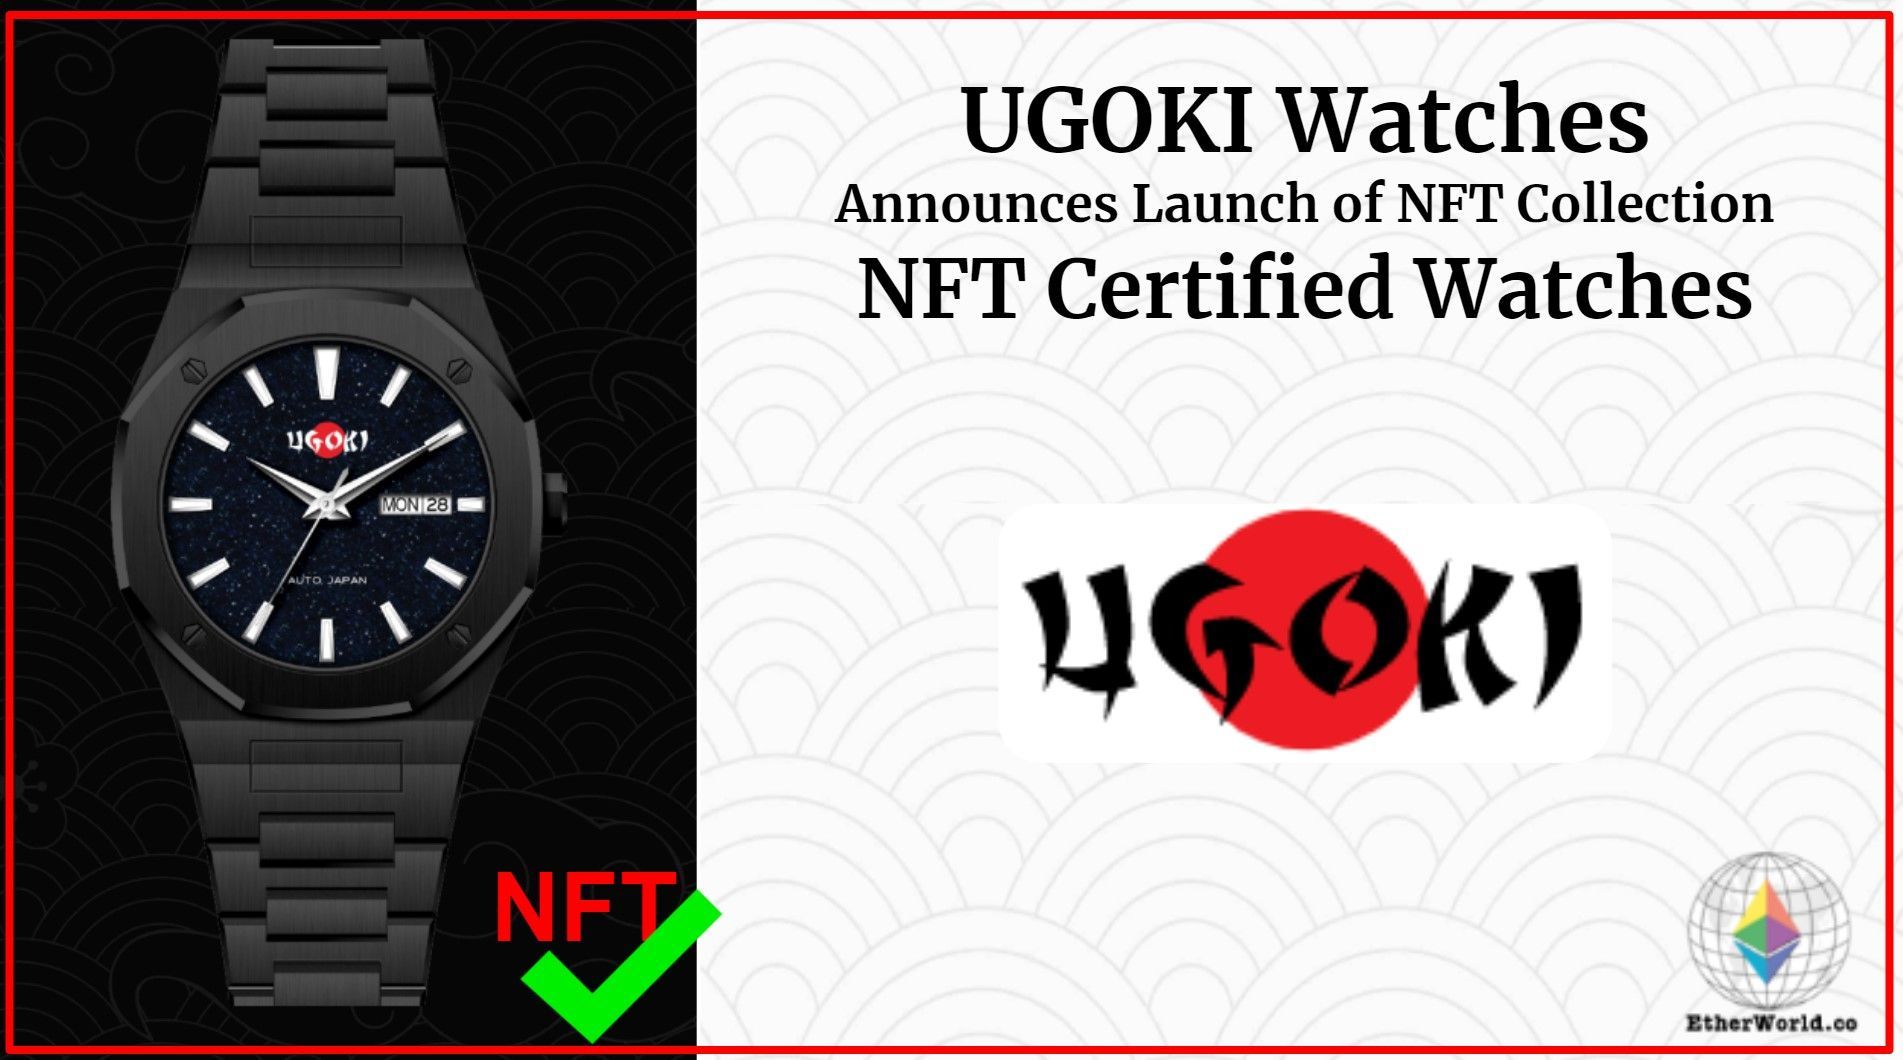 UGOKI Watches Announces Launch of NFT Collection